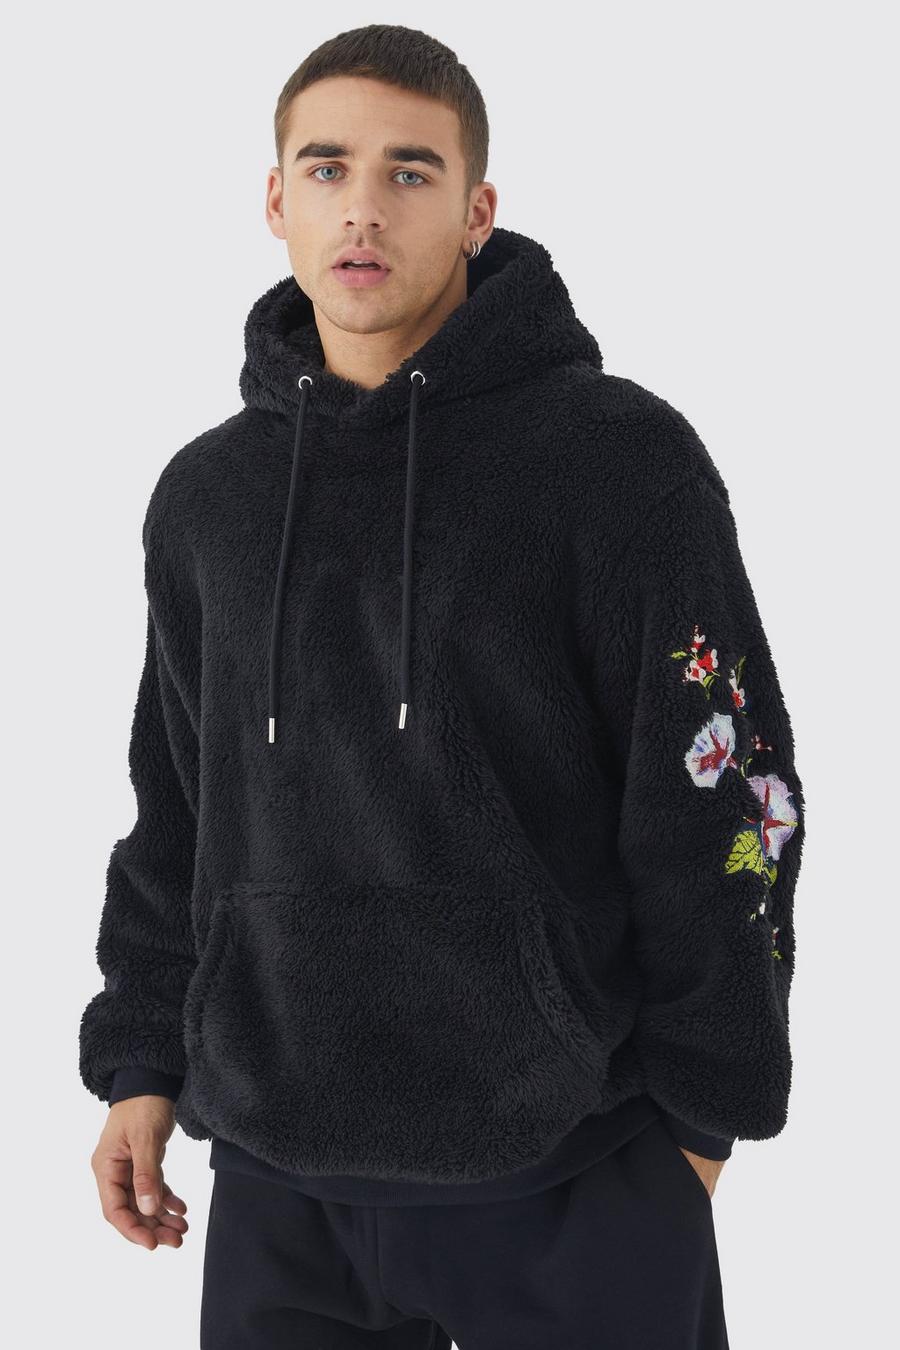 Black Oversized Borg Hoodie With Floral Embroidery